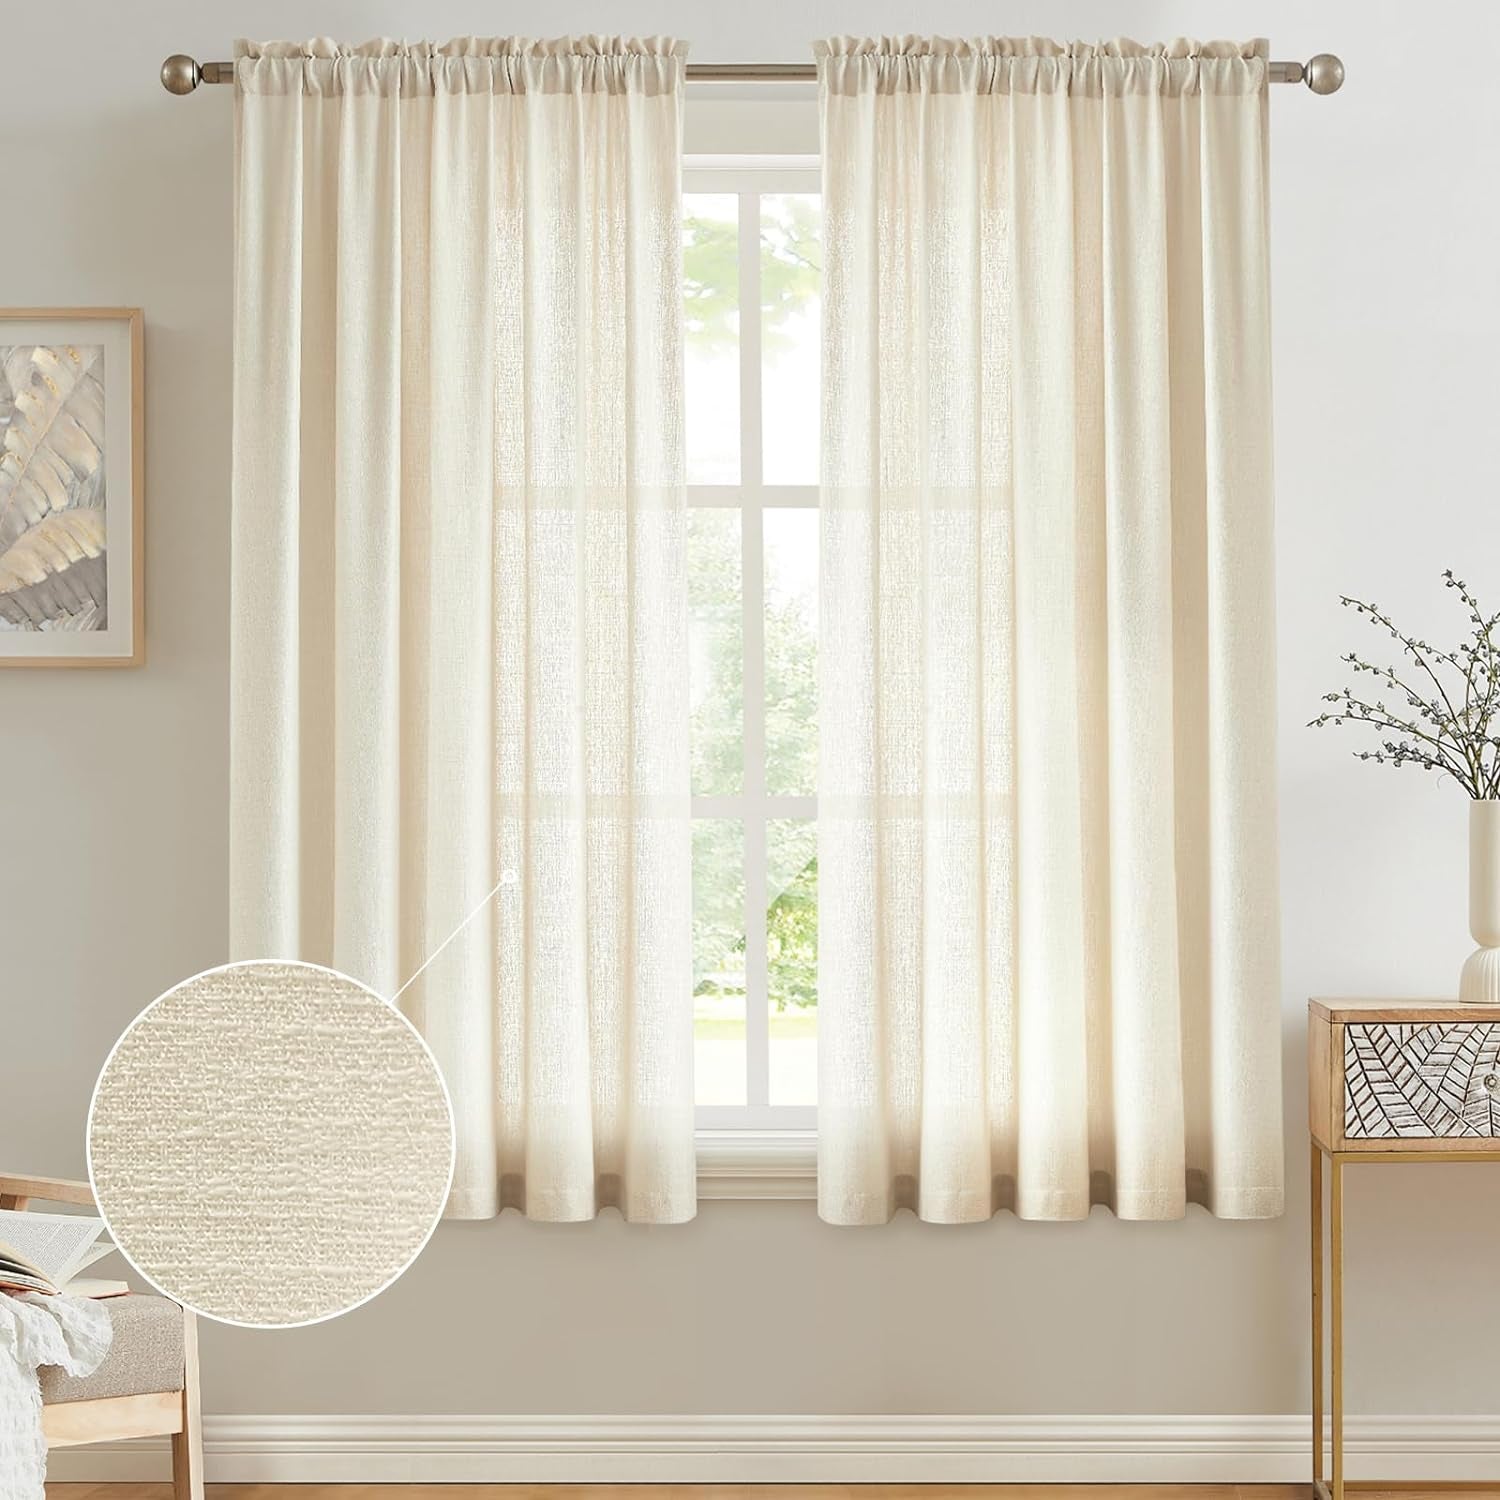 Anpark White Semi Sheer Curtains Linen Rod Pocket Curtains Tiebacks Included Semi Sheers, Privacy & Serenity for Bedroom, Soft Light for Relaxation - 52" W X 84" L, 2 Panels  Anpark Beige 52X63 Inch 